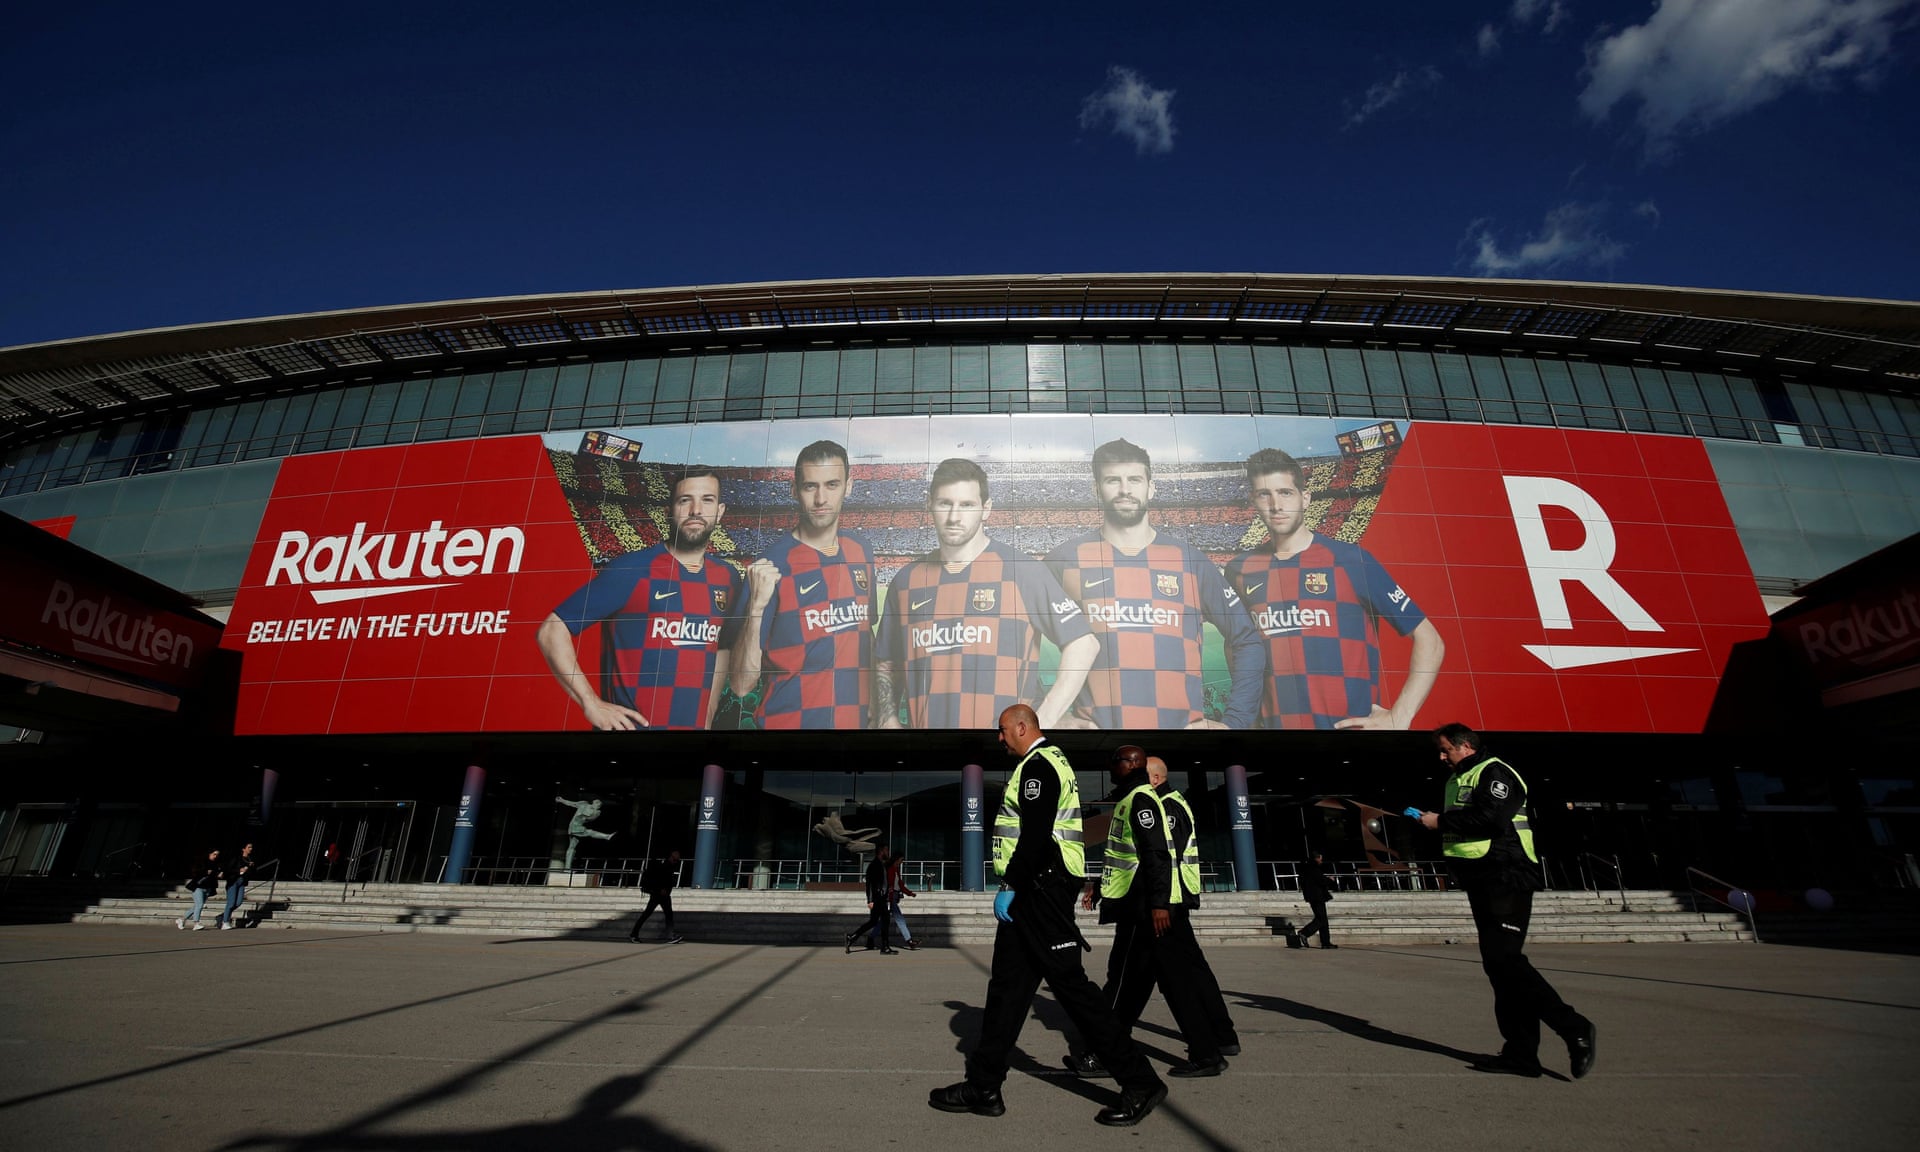 Barcelona come to terms on wage deferral that could save club upto €172 million 